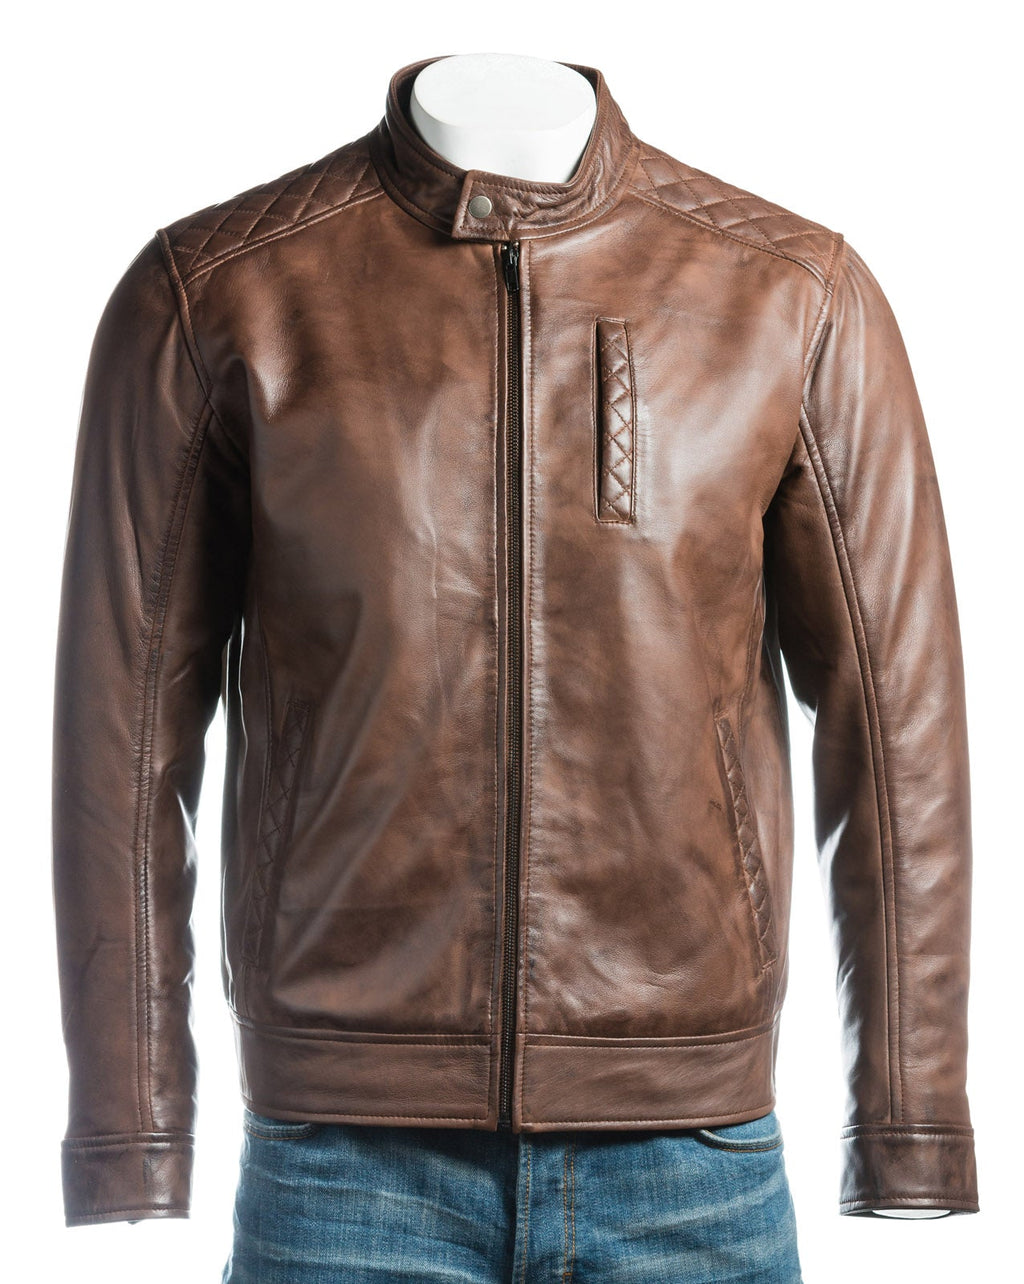 Men's Brown Slim Fit Racer Style Leather Jacket With Shoulder Detail: Silvano